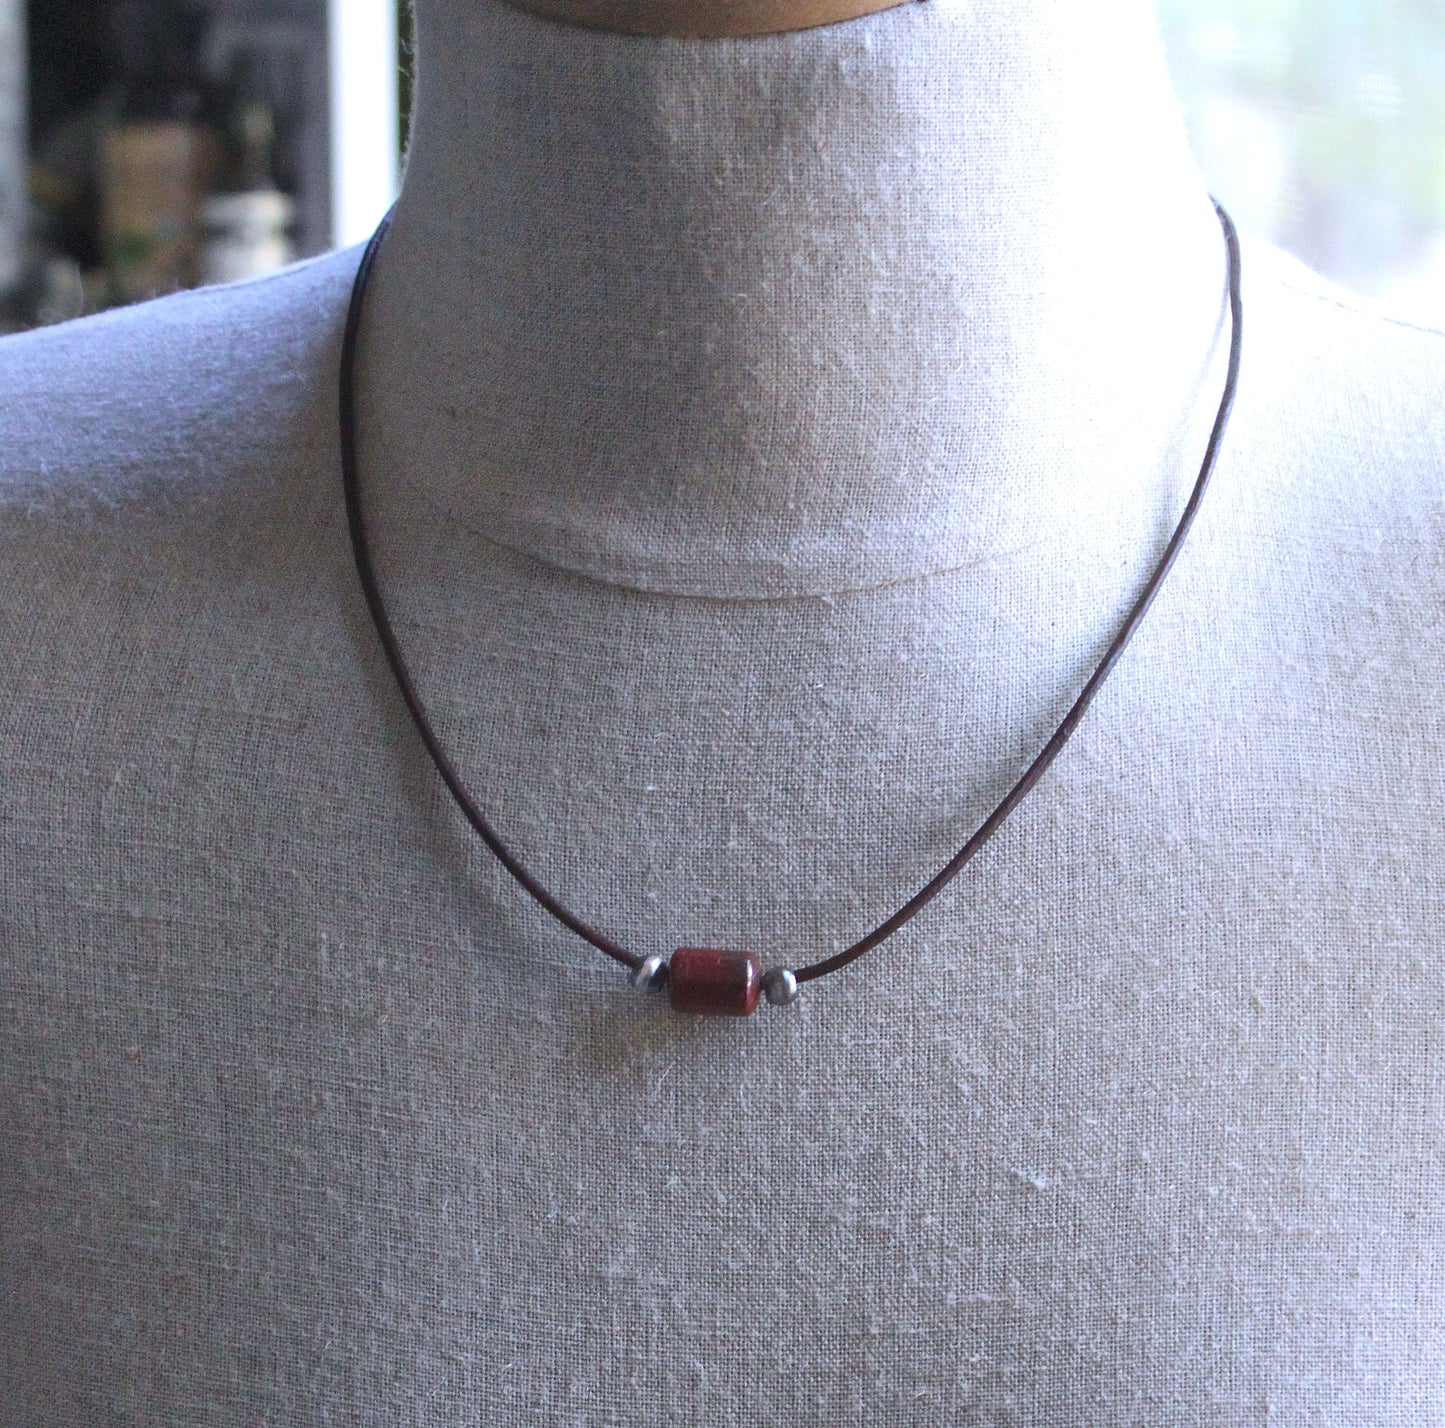 Red Jasper Barrel Bead Leather Cord Necklace